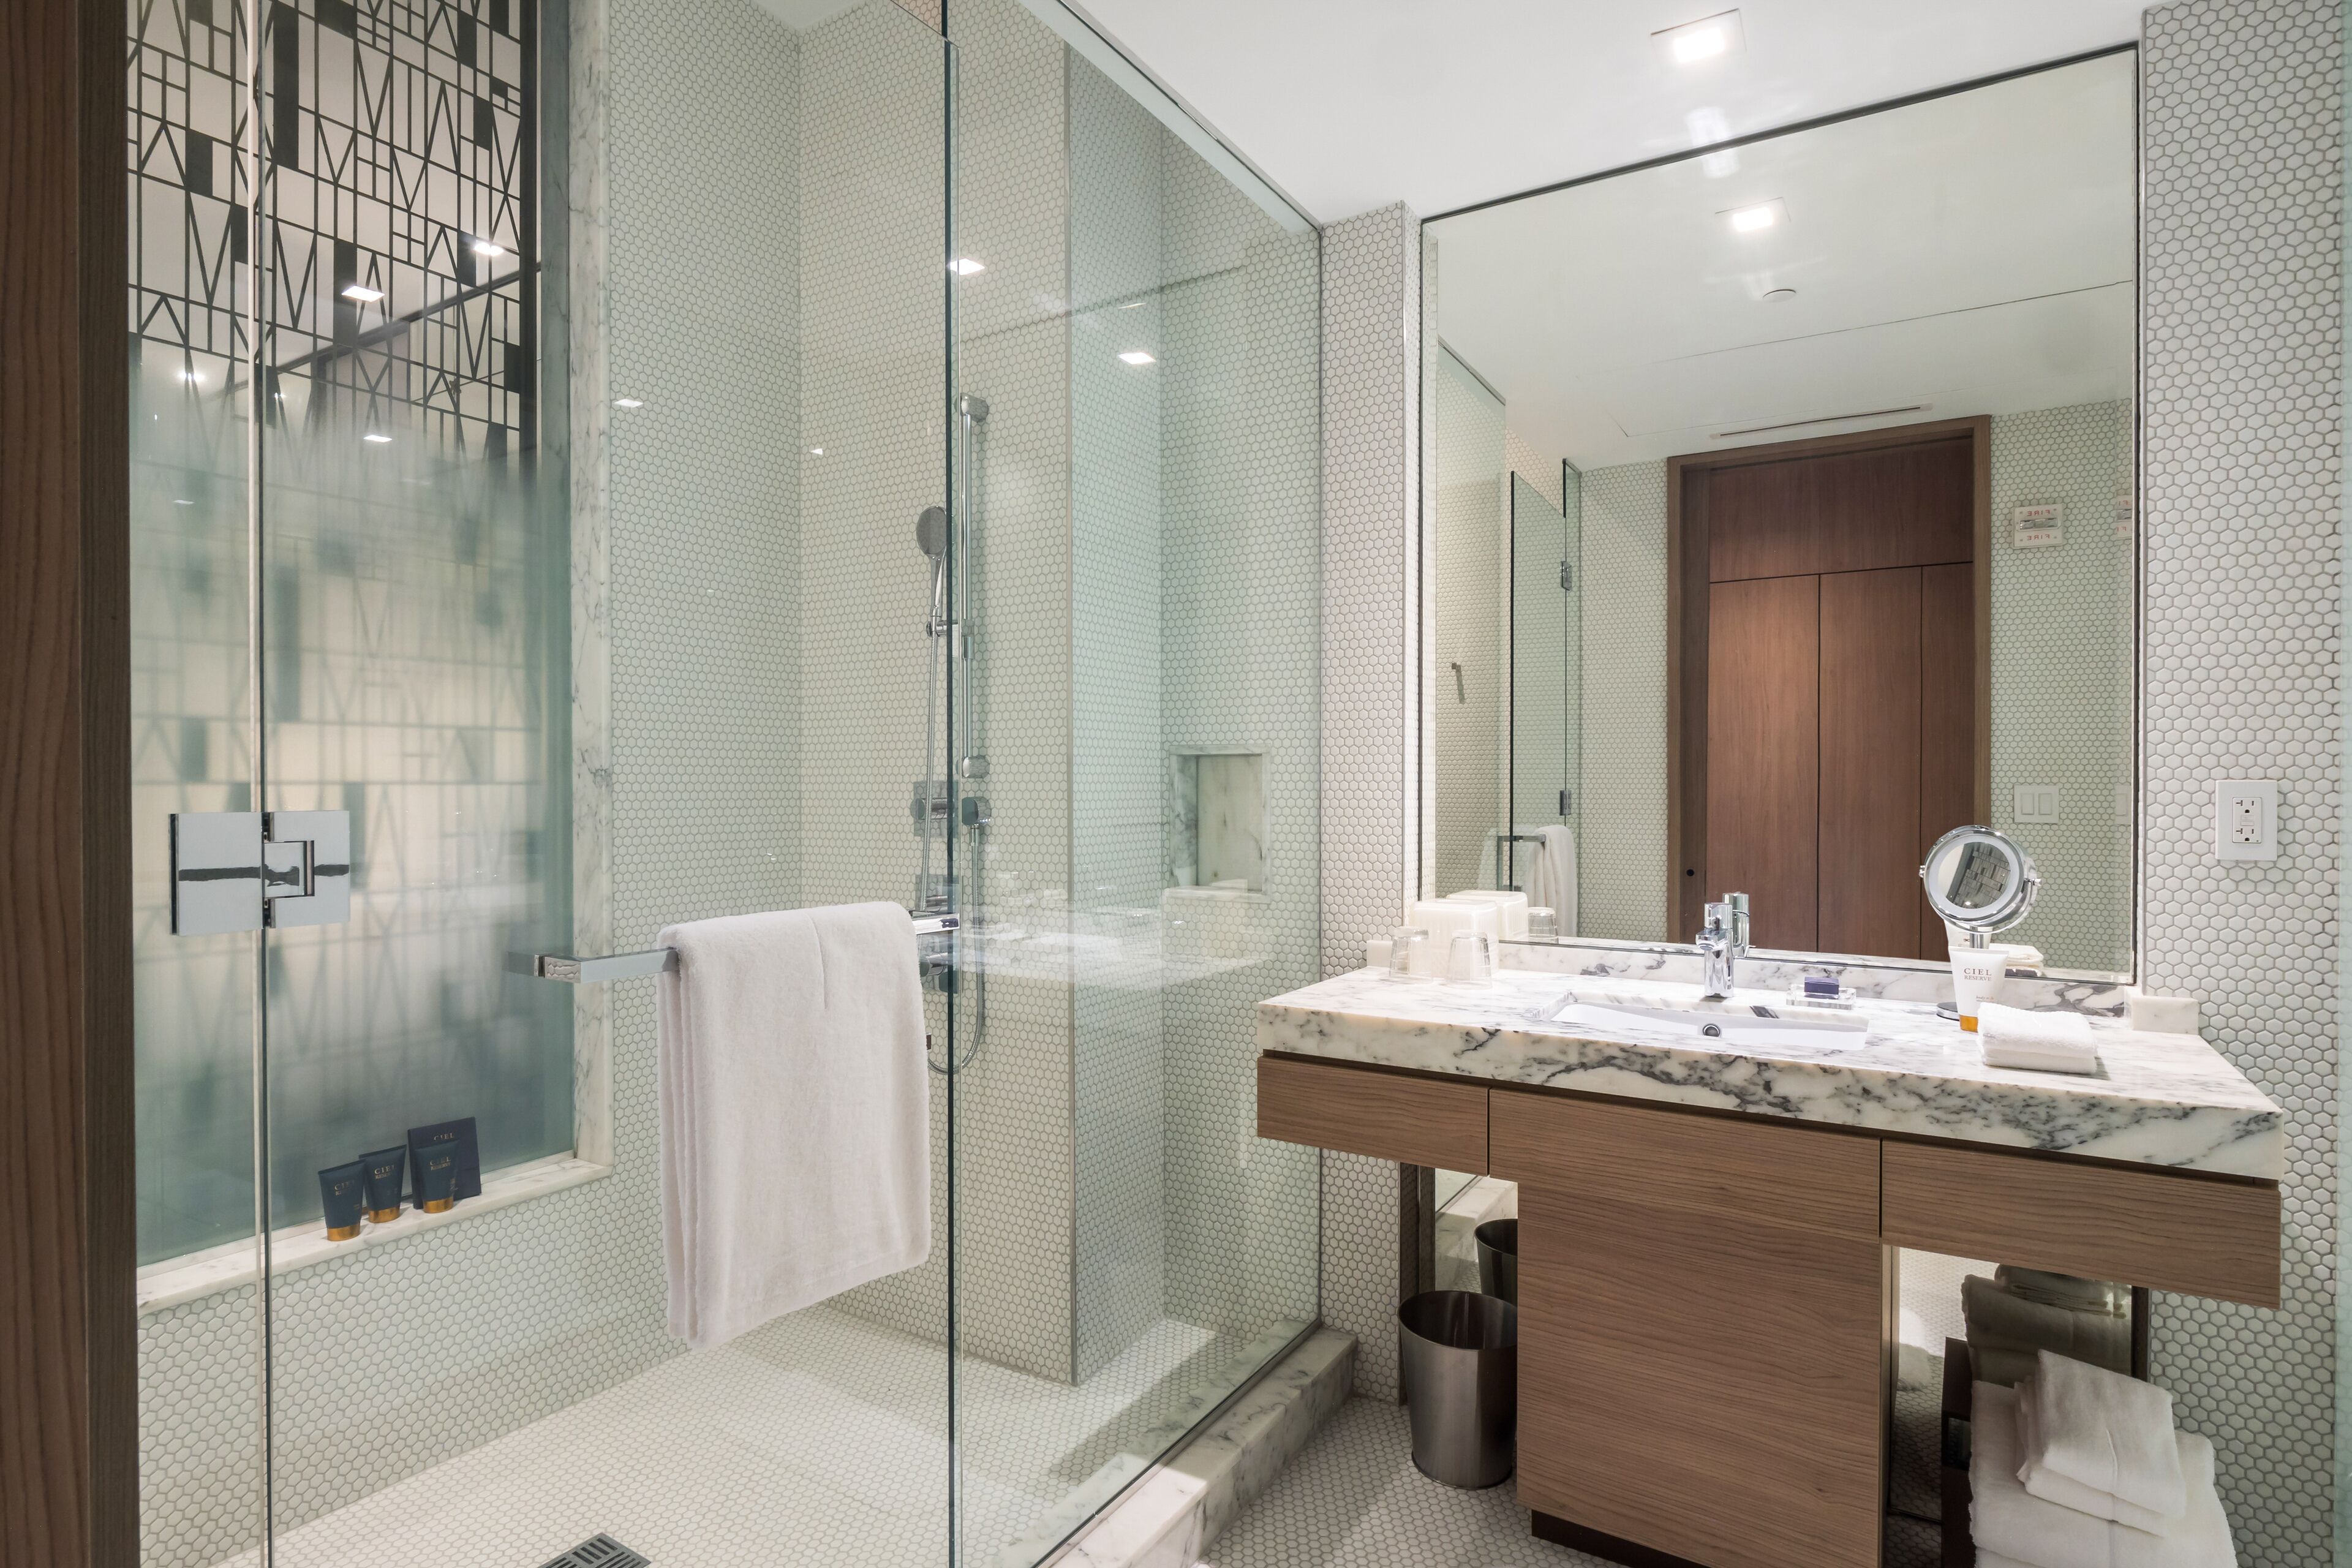 Suites at SLS LUX Brickell managed by CE